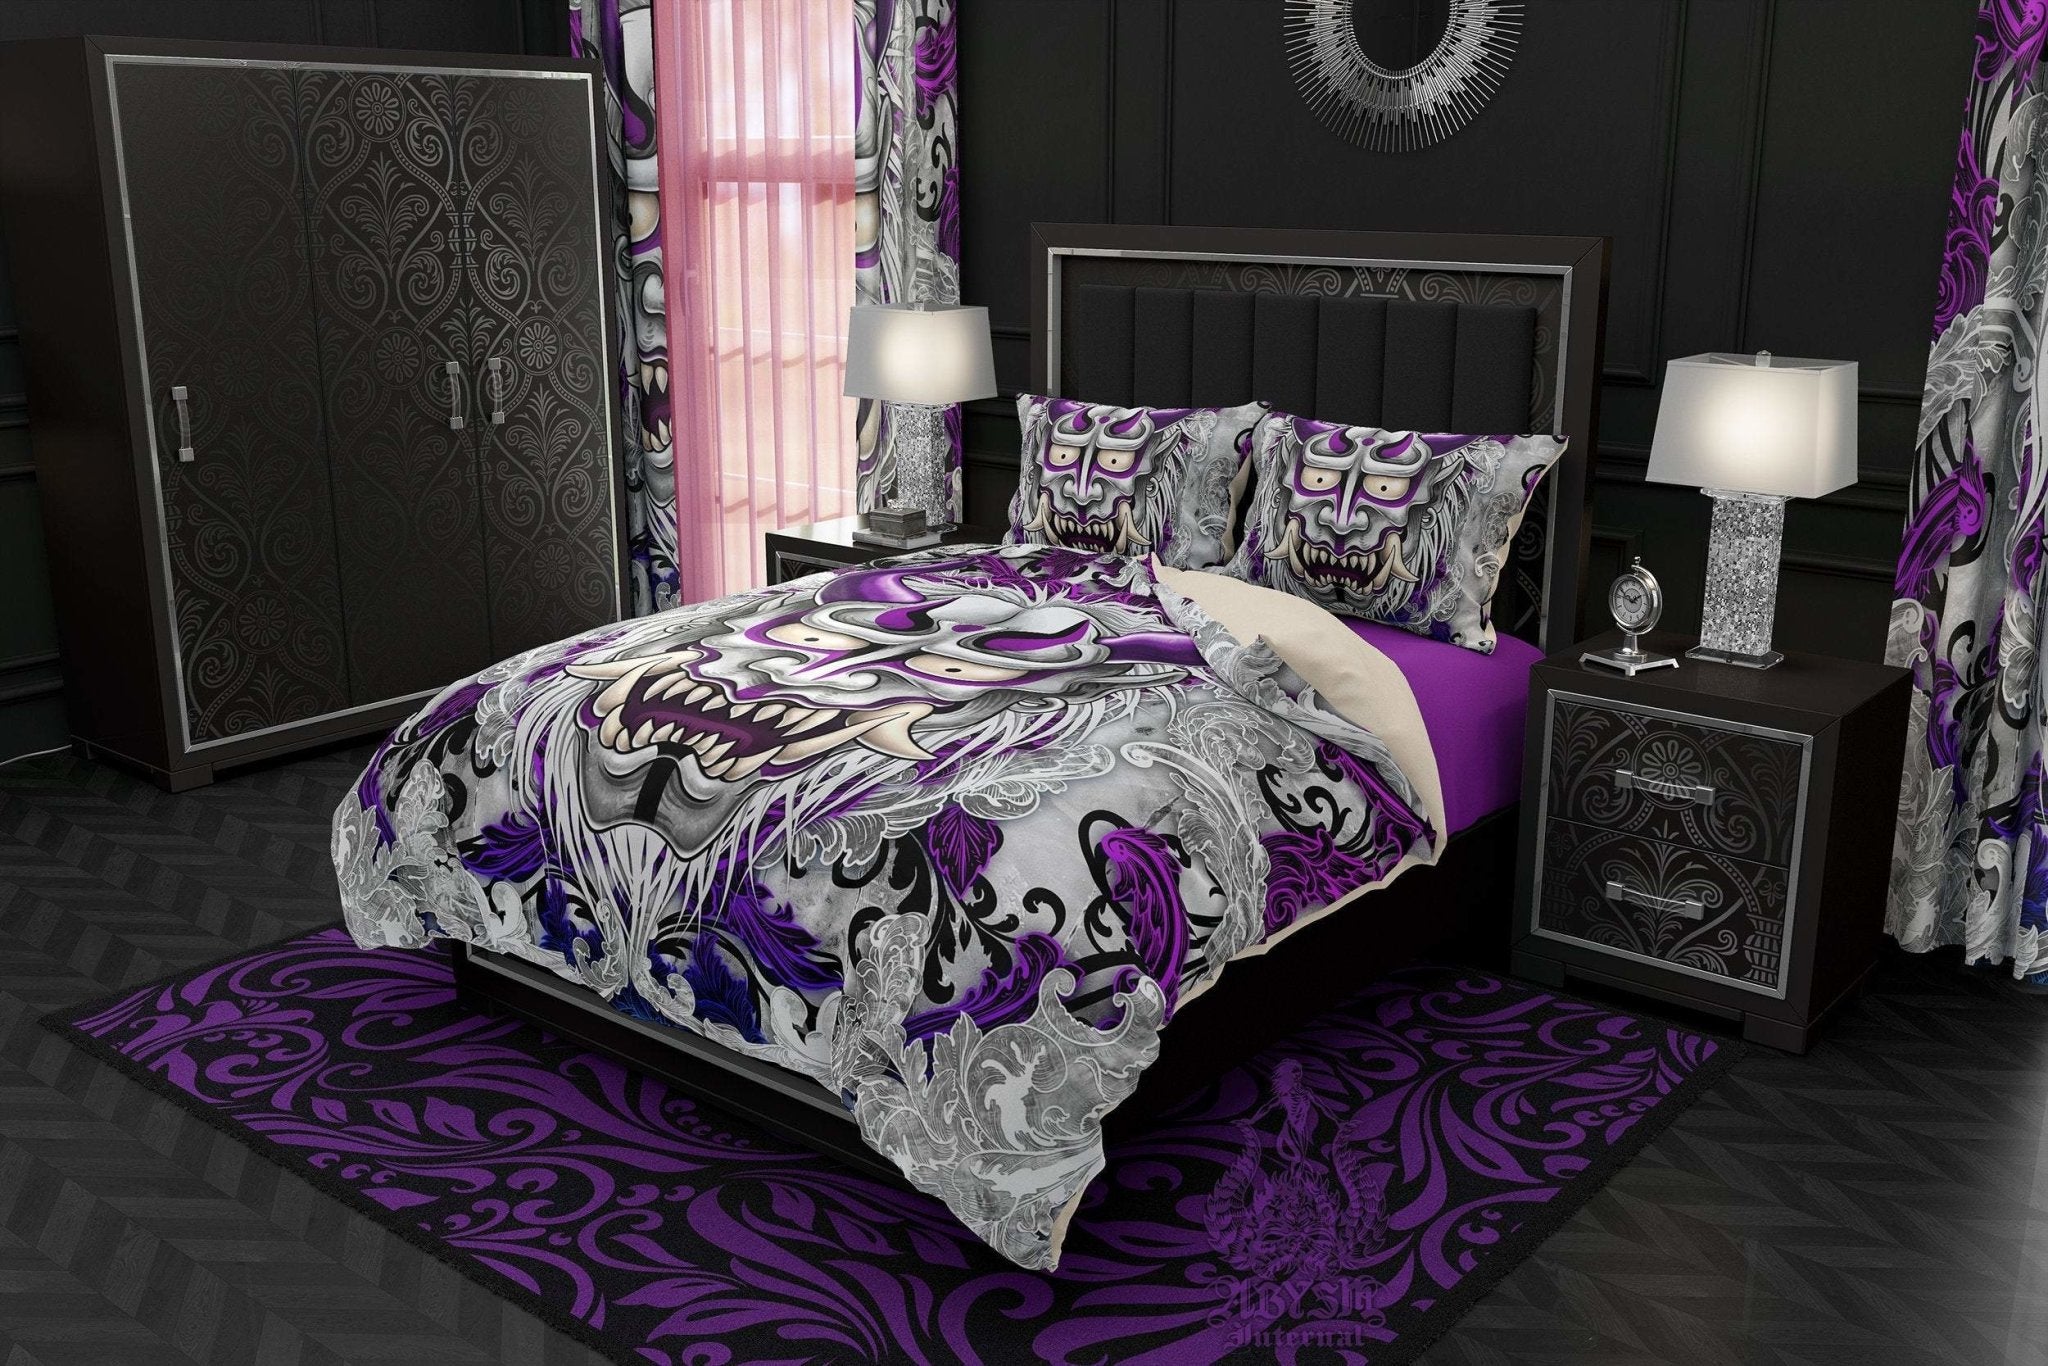 Oni Bedding Set, Comforter and Duvet, Japanese Demon, Pastel Goth Bed Cover and Bedroom Decor, King, Queen and Twin Size - White and Purple - Abysm Internal